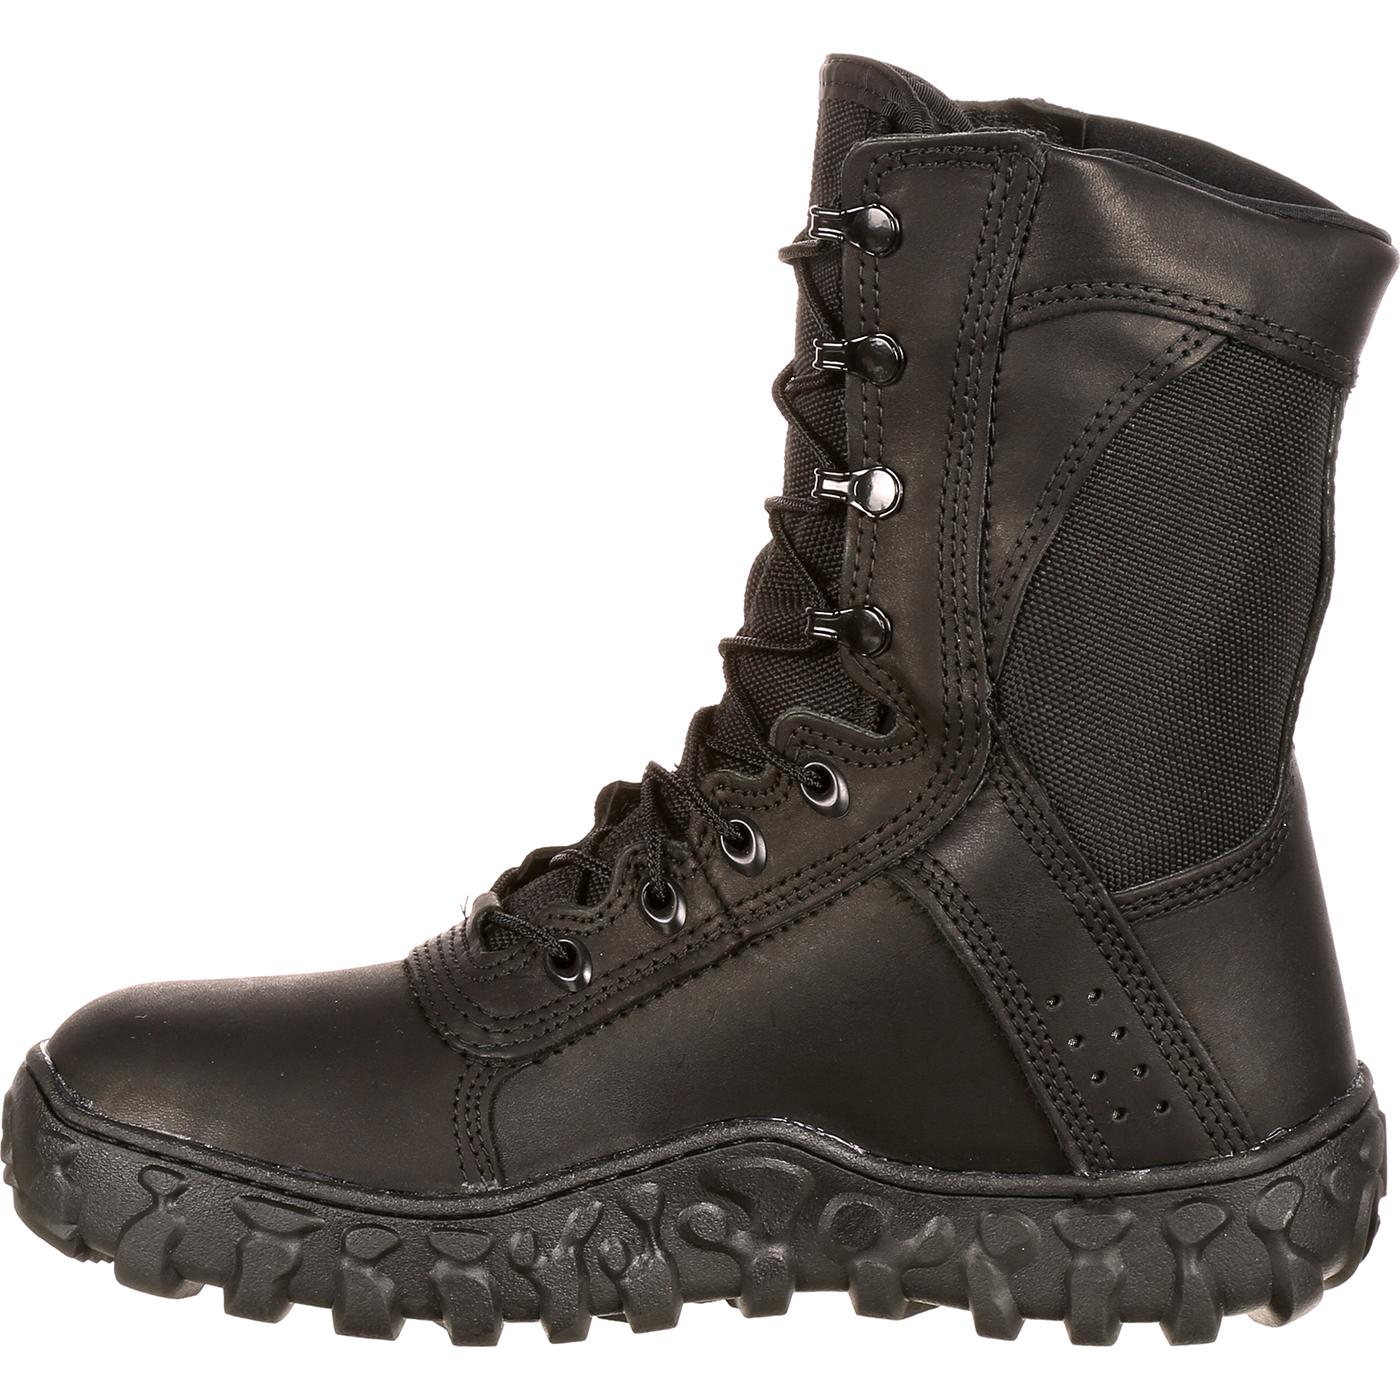 American-Made Black Military Boots, Rocky S2V FQ0000102